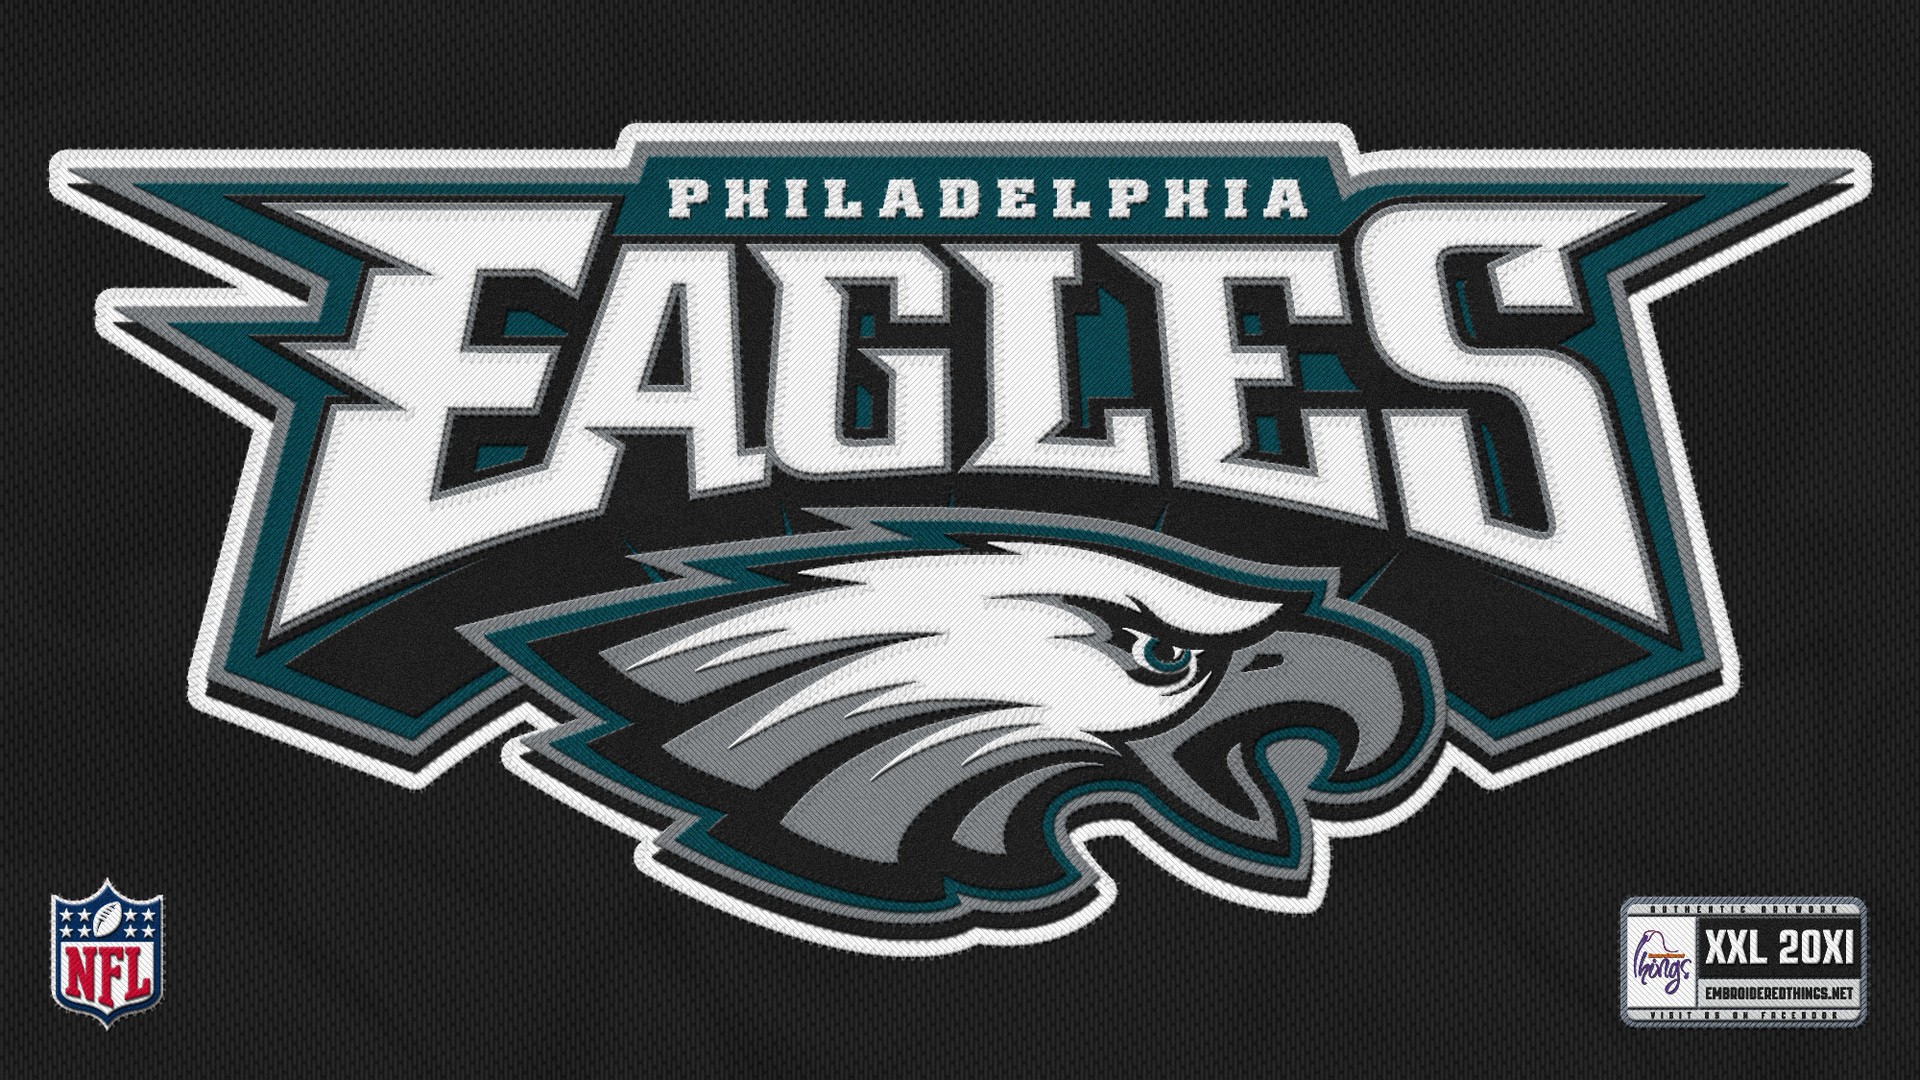 Eagles Wallpaper For Mac Backgrounds with resolution 1920x1080 pixel. You can make this wallpaper for your Mac or Windows Desktop Background, iPhone, Android or Tablet and another Smartphone device